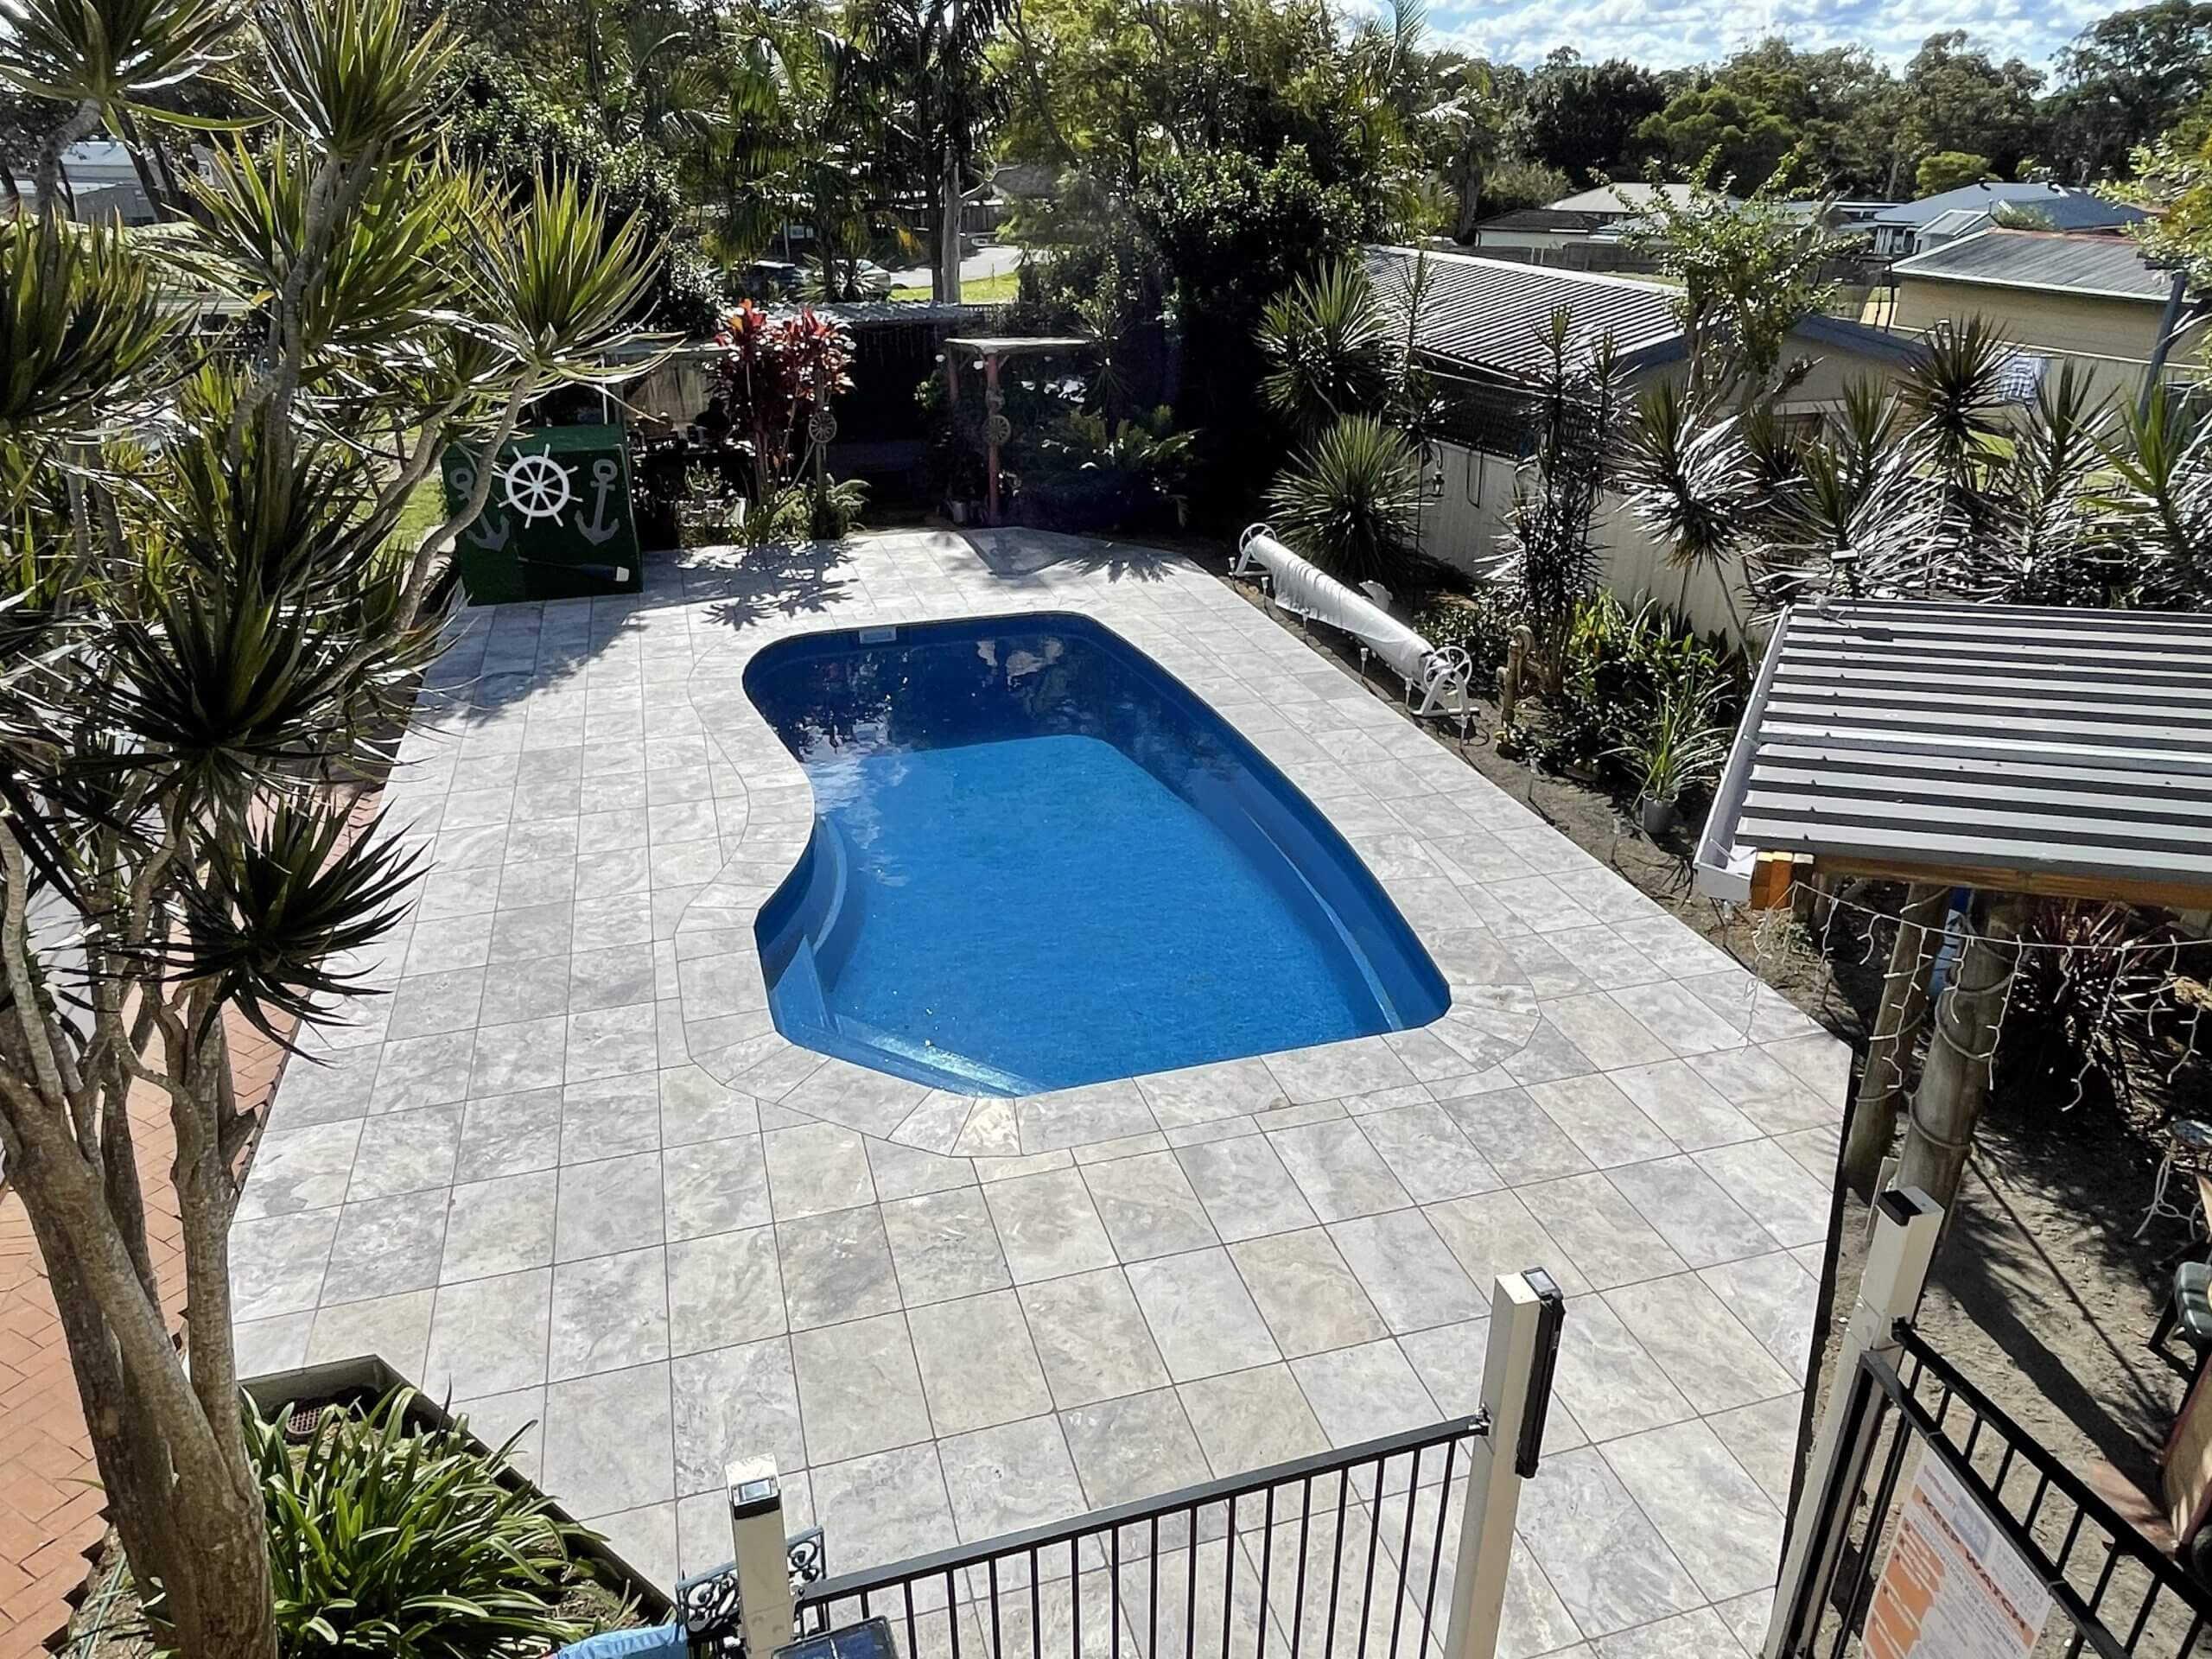 Contact Us The Hunter’s pool surround specialists